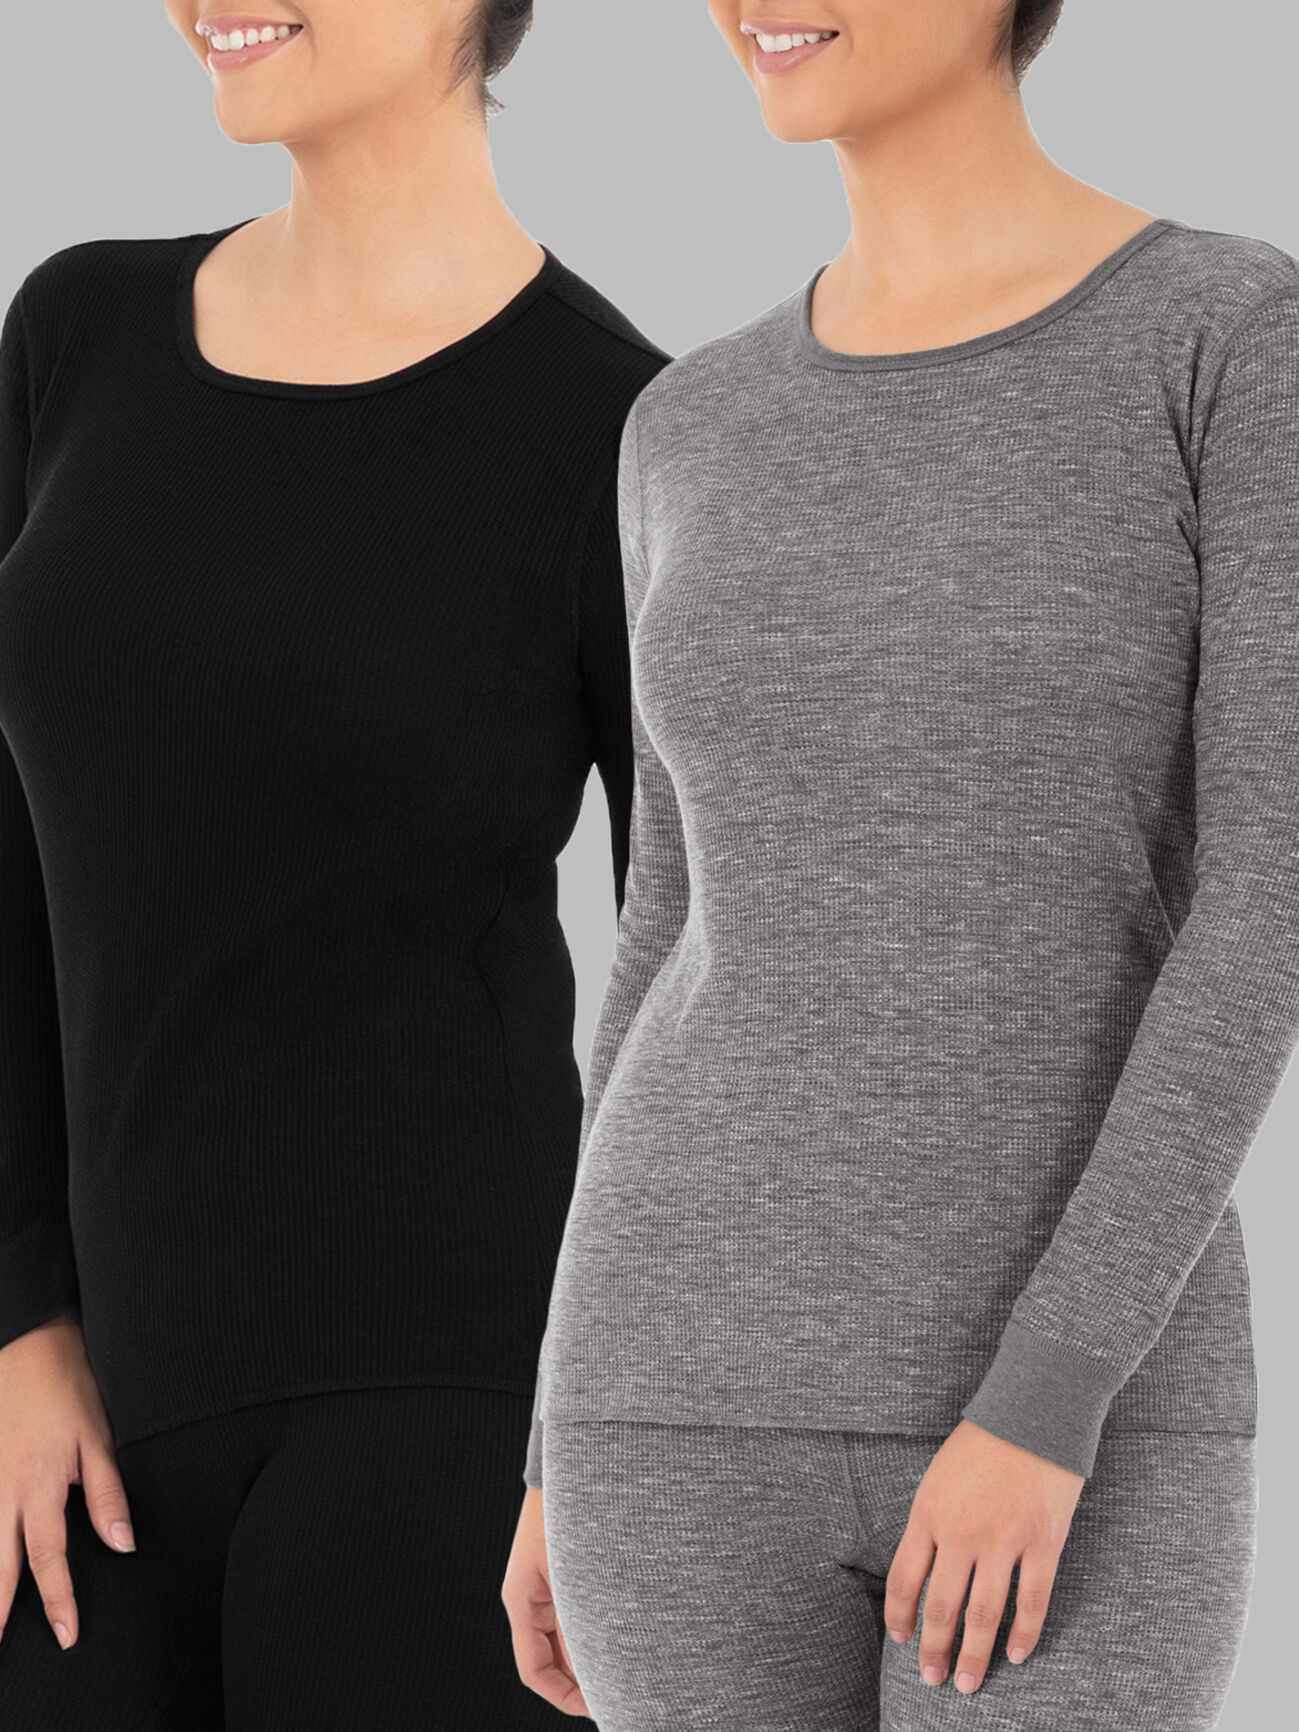 Women's Fleece-Lined Long-Sleeved Thermal Tops (3-Pack) with Plus